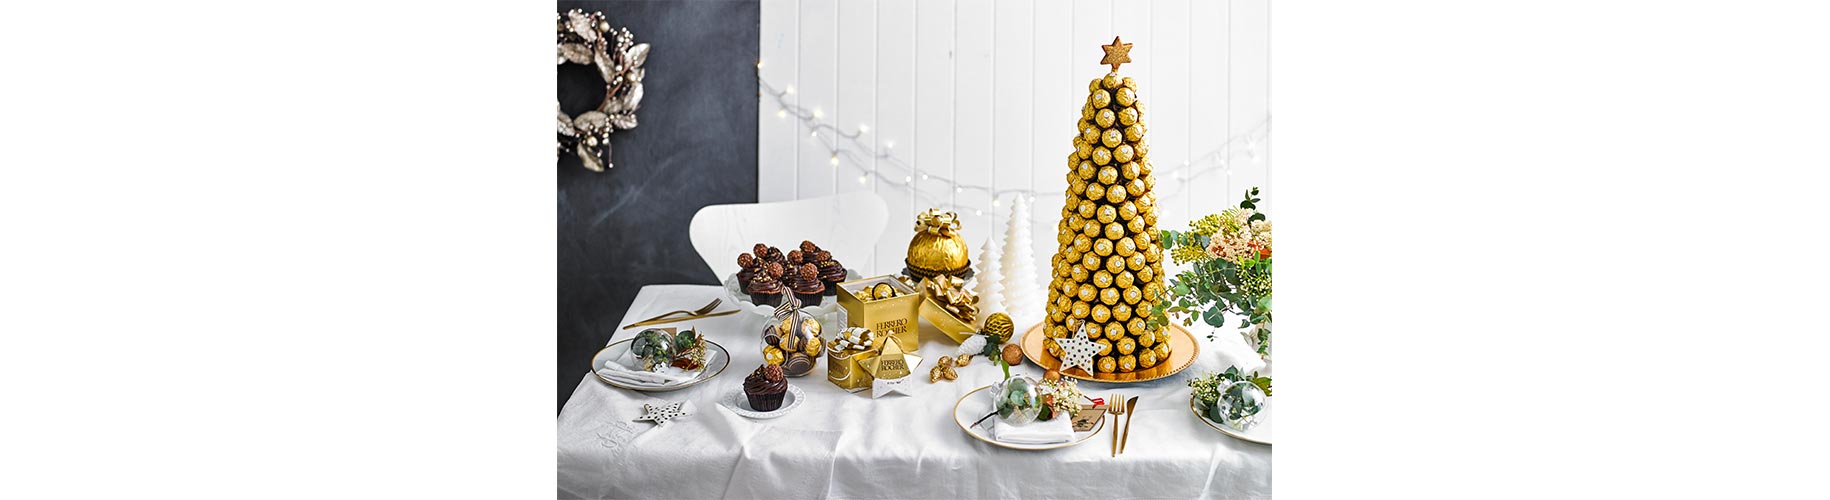 dining table with Ferrero Rocher chocolates